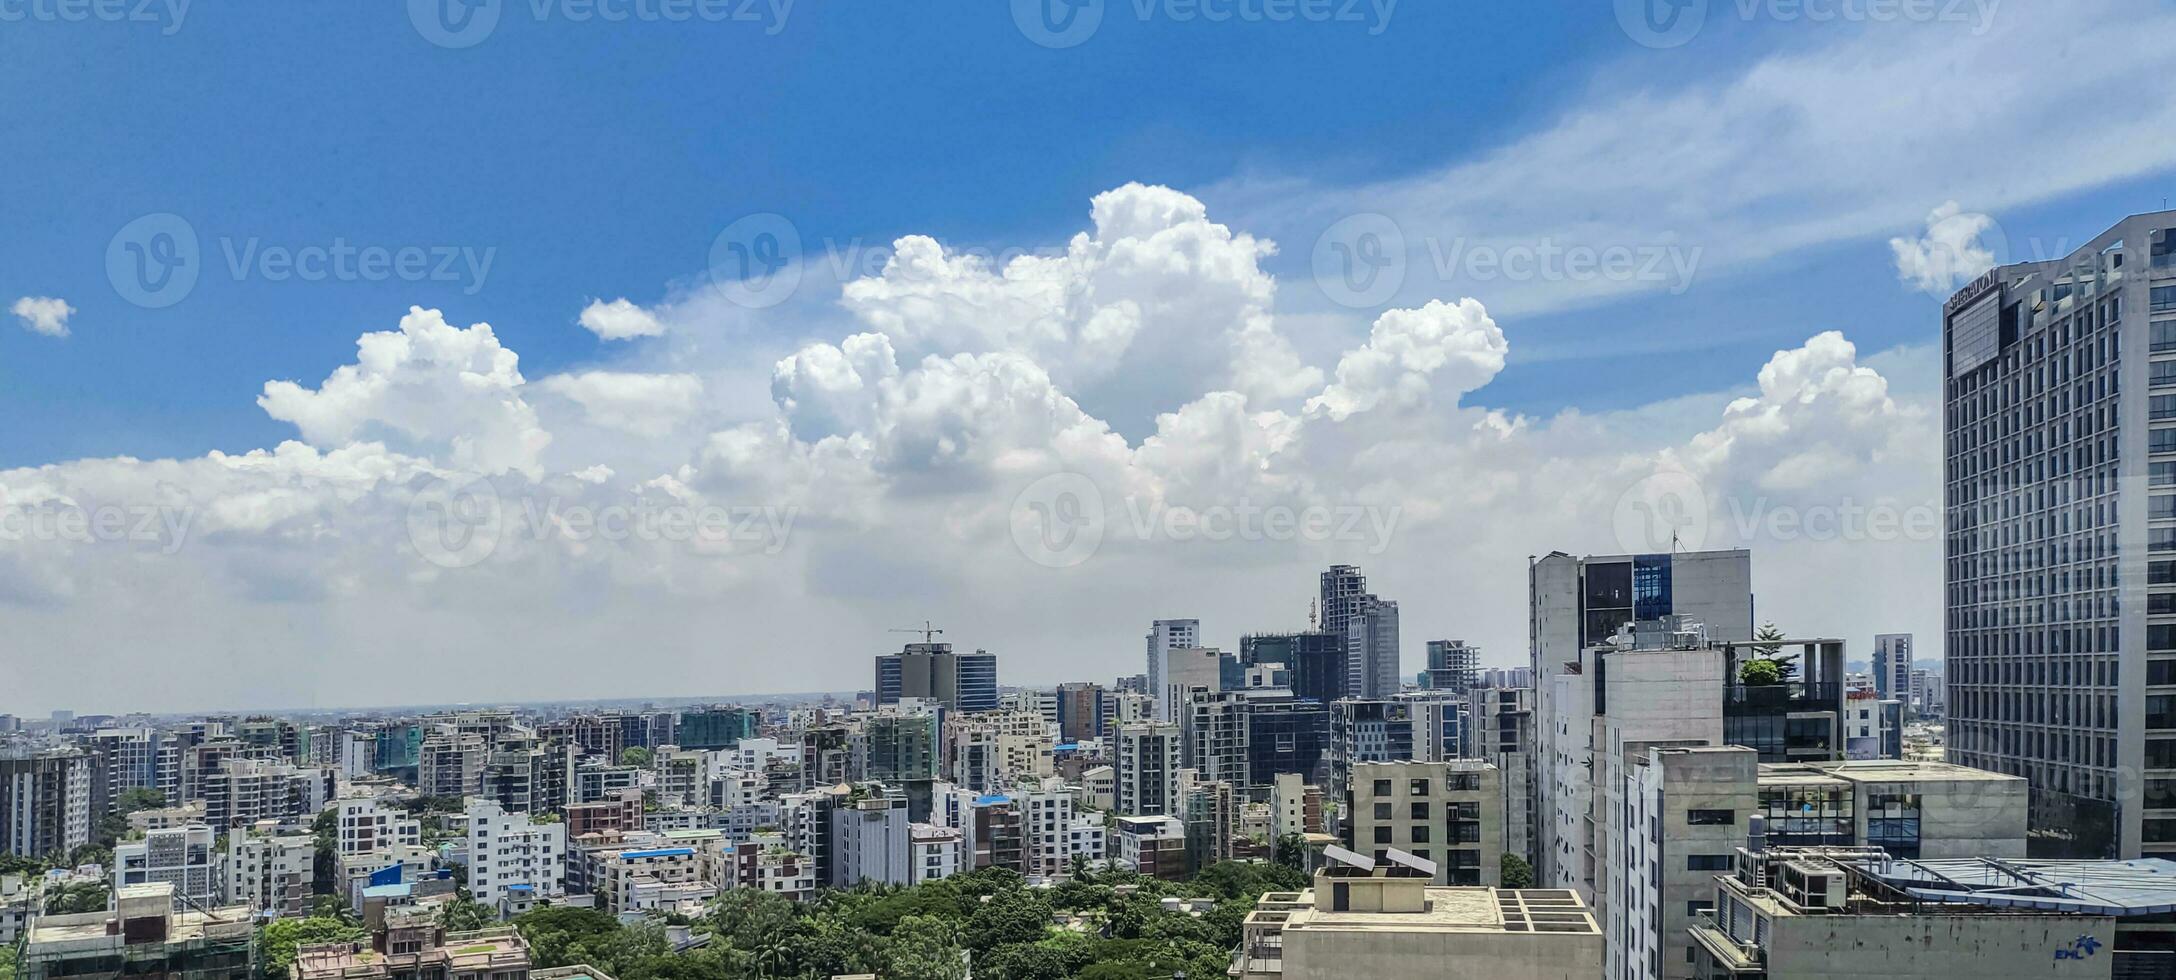 a view of the city skyline from a high rise building in Dhaka Bangladesh photo